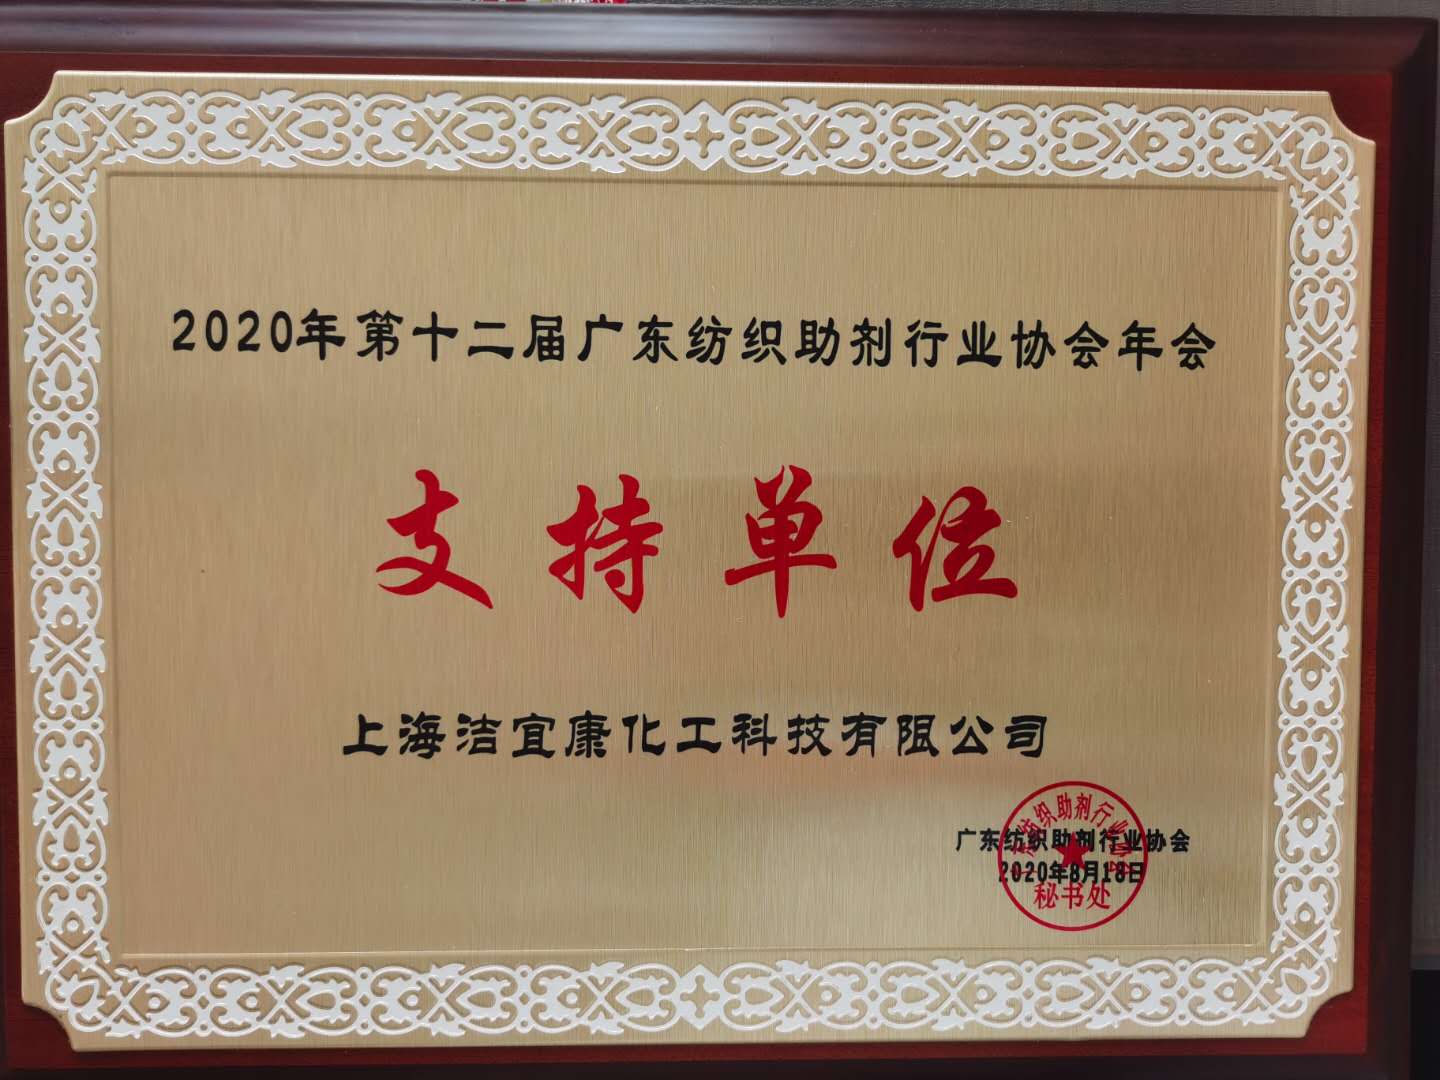 Supporting unit of the 12th Annual Meeting of Guangdong Textile Auxiliaries Industry Association in 2020